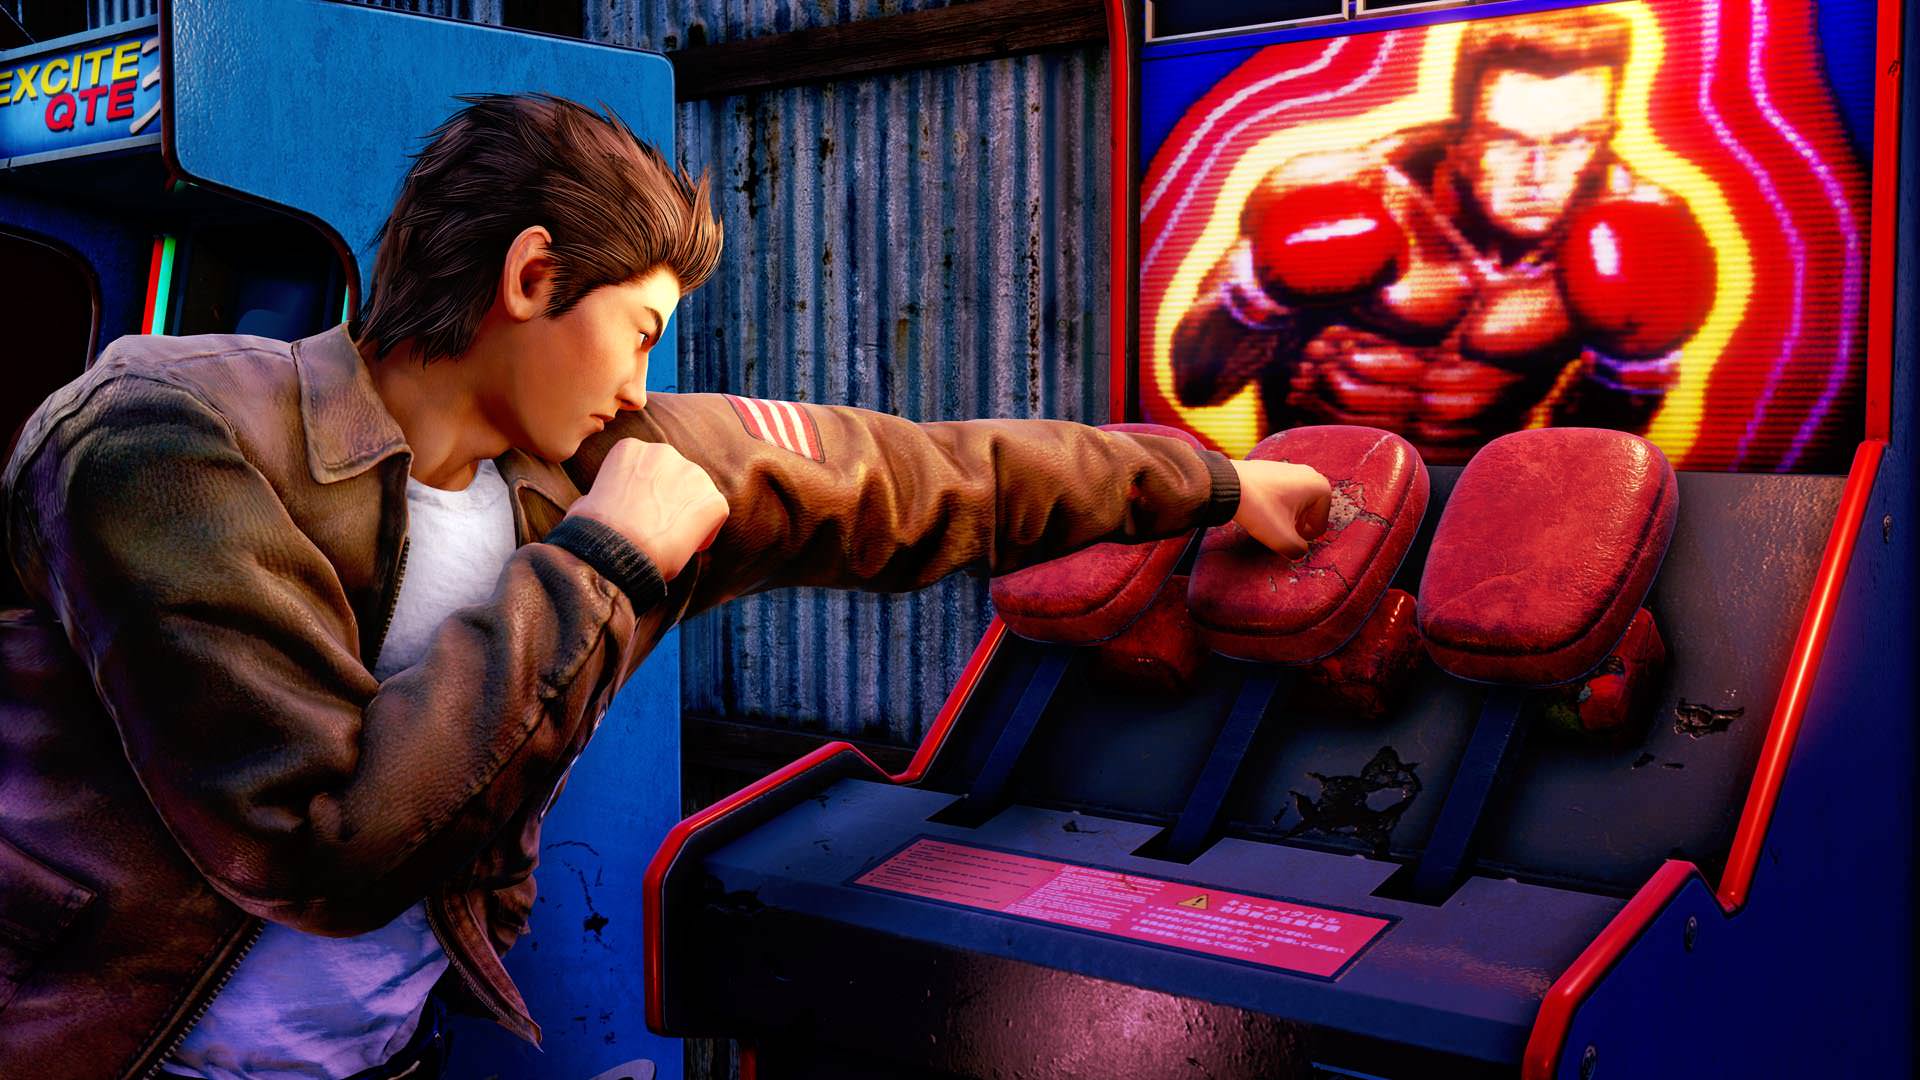 Shenmue Iii Image Shows Arcade Punching Machine And